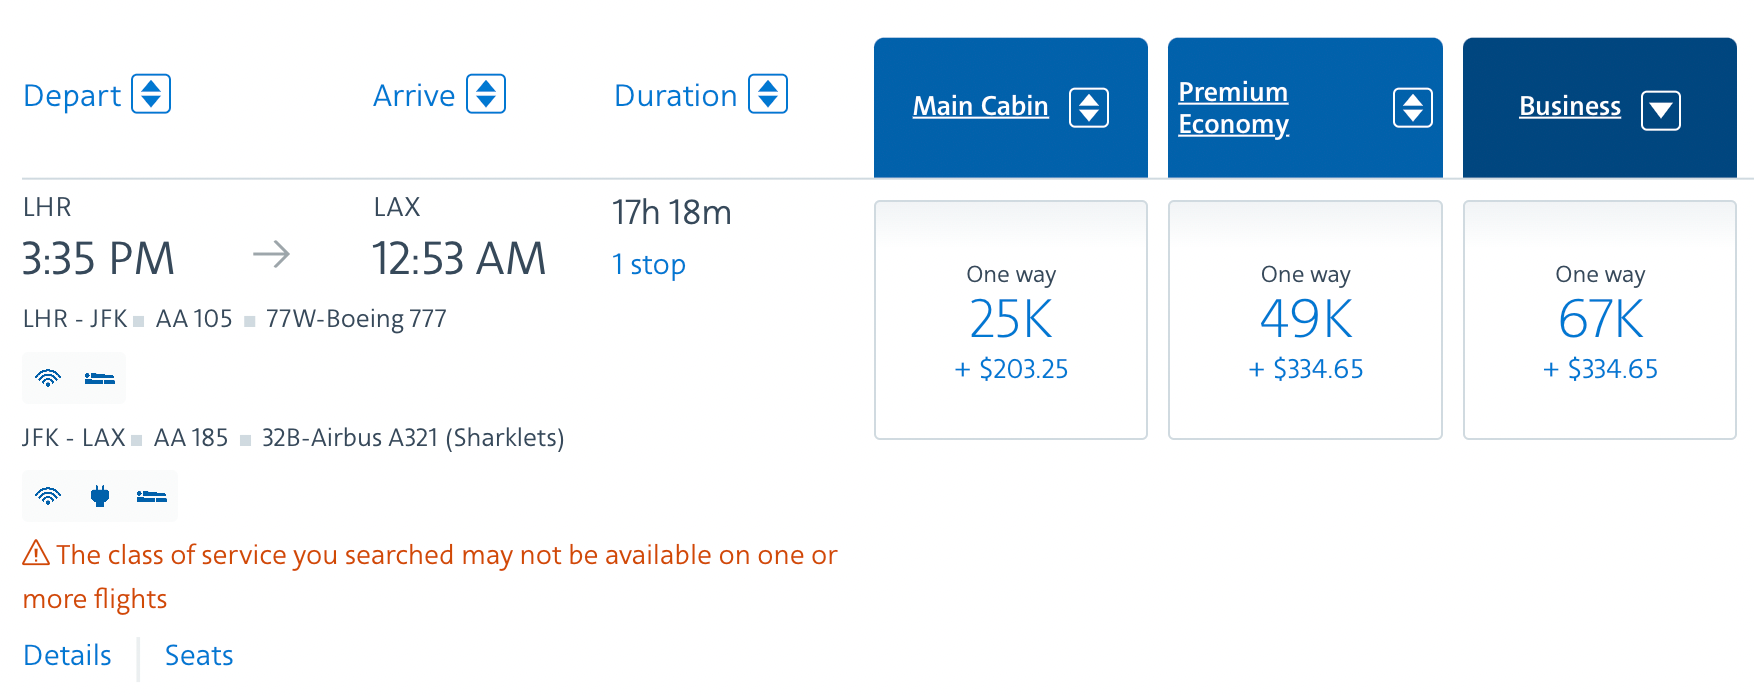 American Airlines one-way award pricing from London Heathrow to Los Angeles